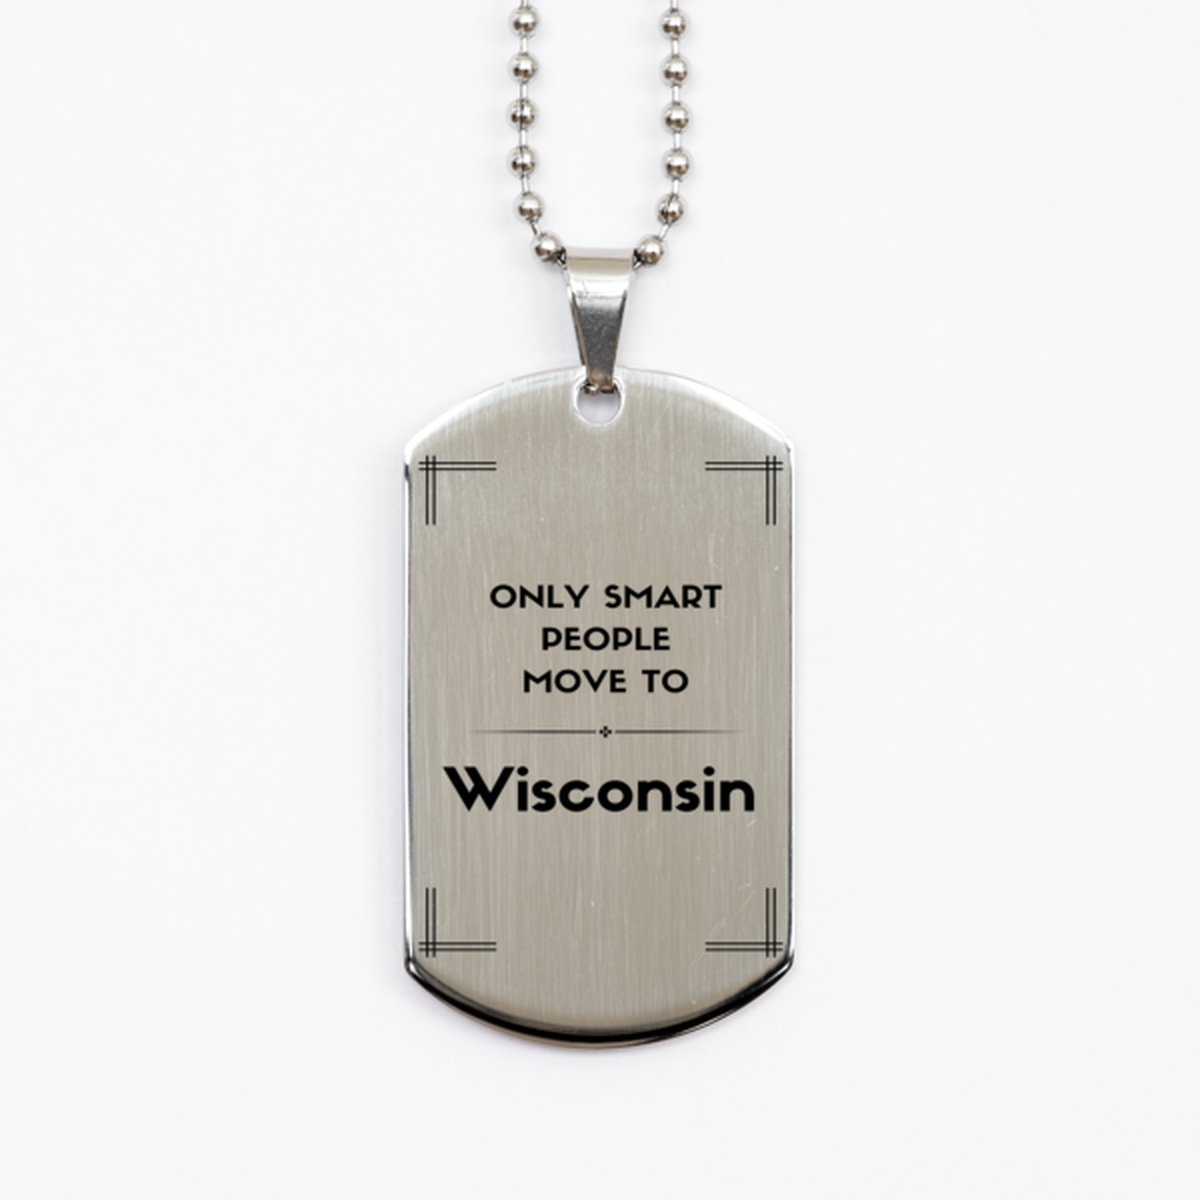 Only smart people move to Wisconsin Silver Dog Tag, Gag Gifts For Wisconsin, Move to Wisconsin Gifts for Friends Coworker Funny Saying Quote